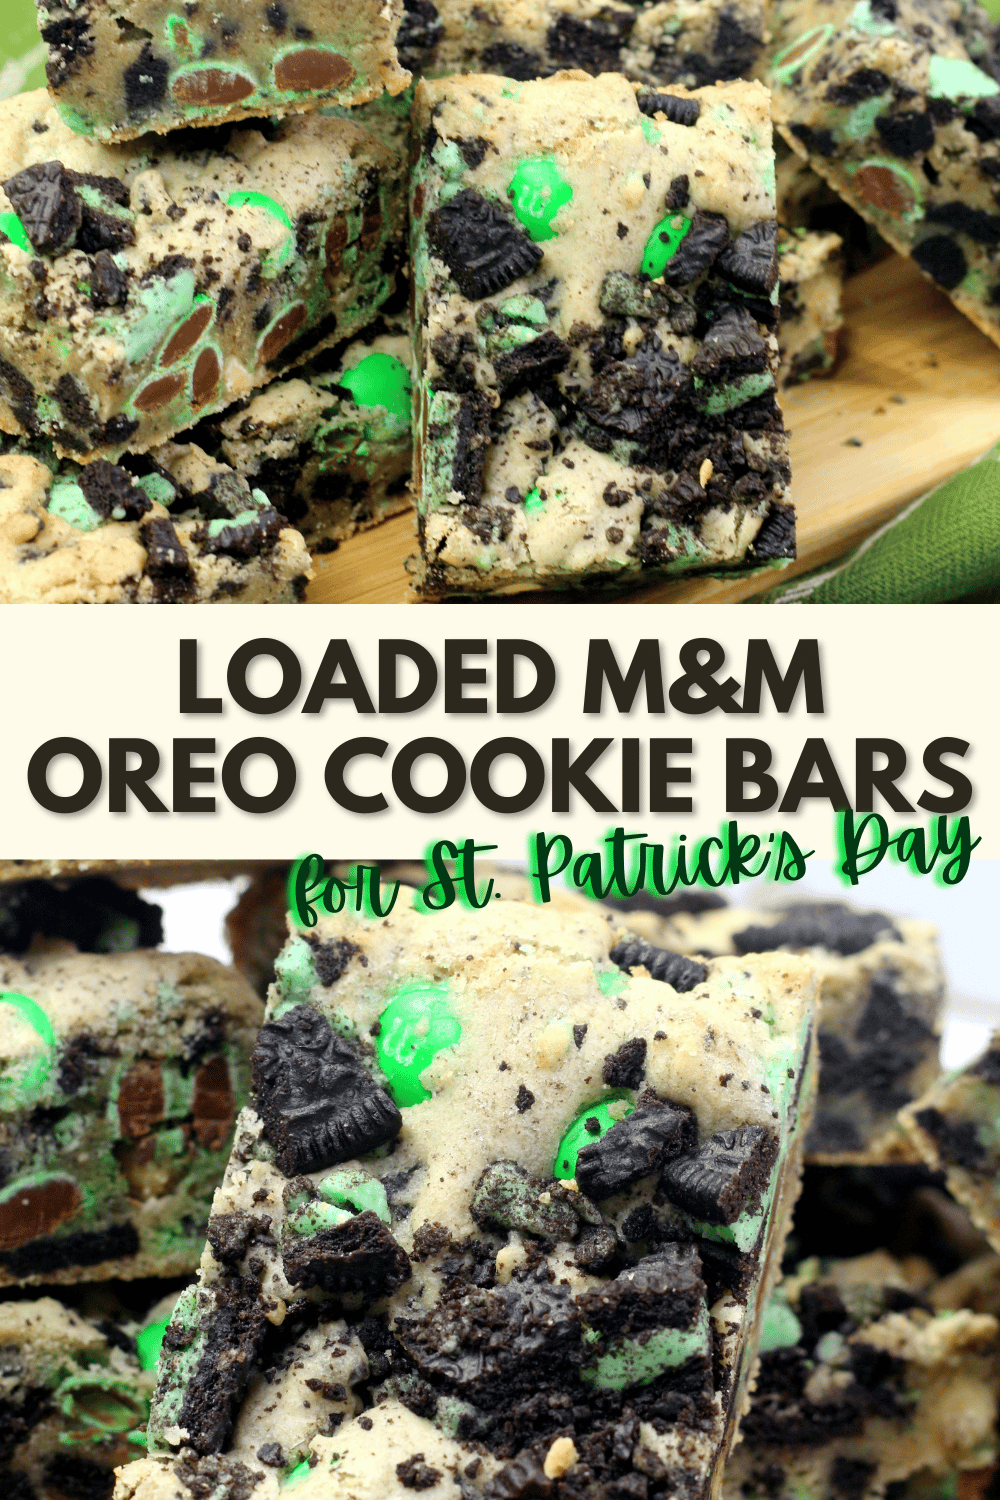 These Loaded M&M Oreo Cookie Bars for St. Patrick’s Day are soft, chewy and packed with sweet flavors. A perfect treat for the holiday! #loadedm&moreocookiebars #oreocookiebars #cookiebars #stpatricksday #holidaytreat via @wondermomwannab